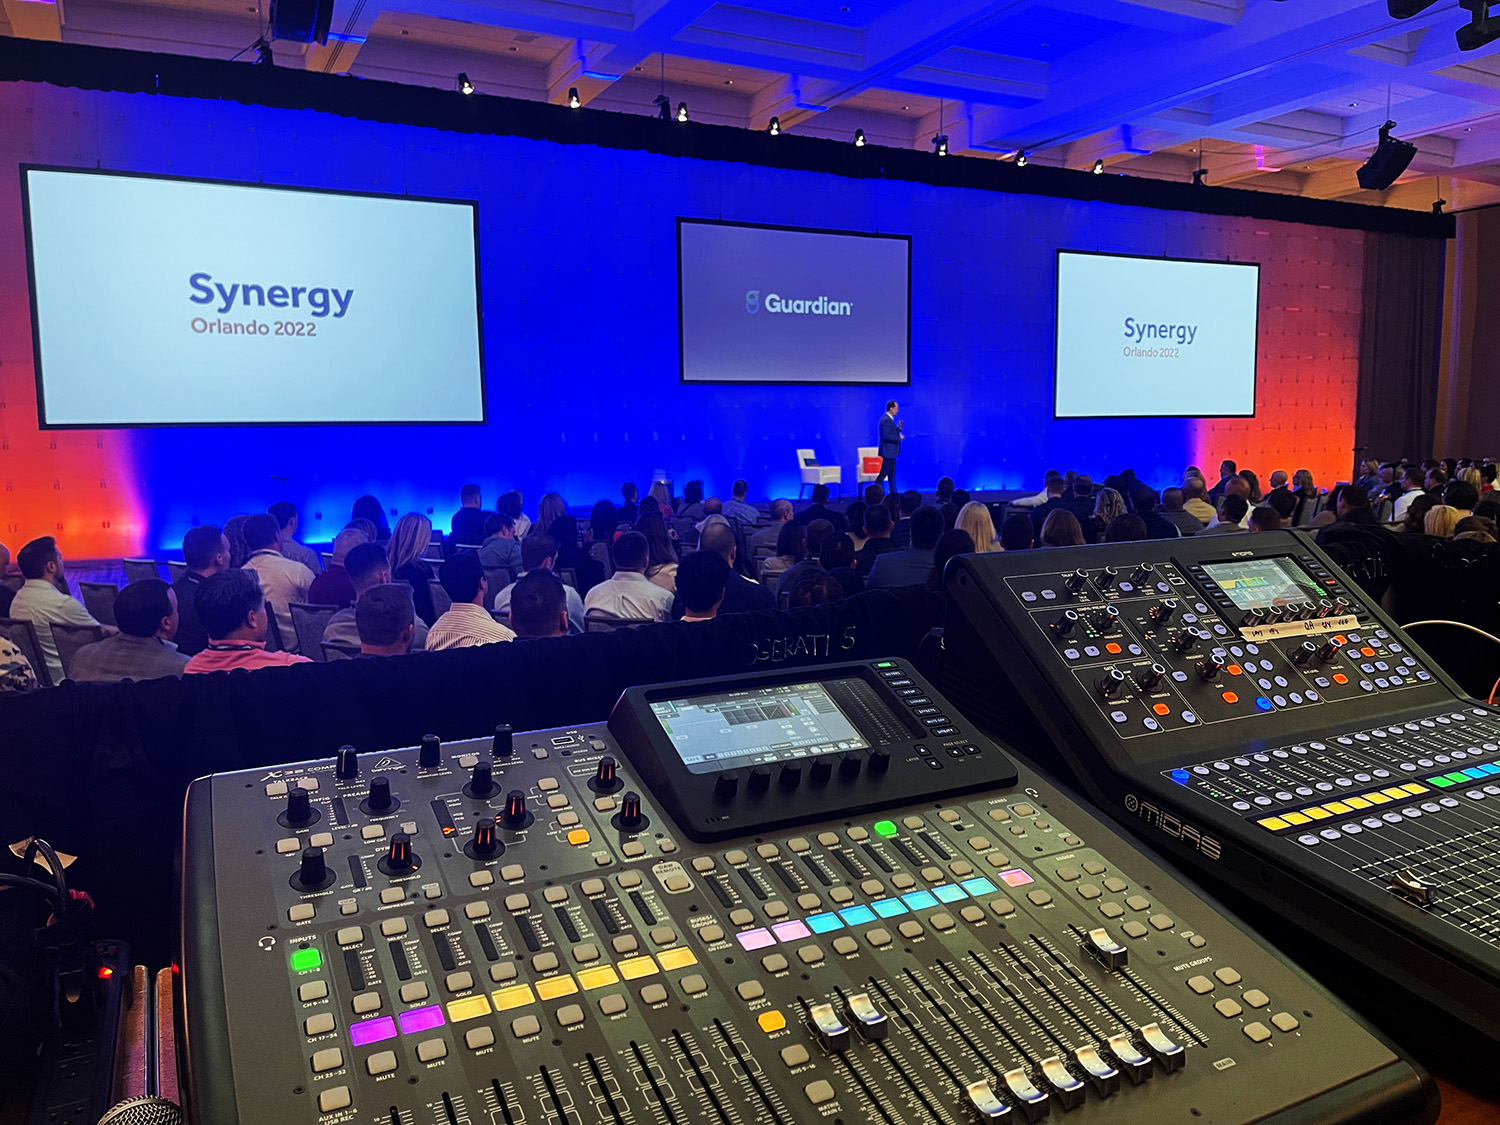 A sound mixing console in the foreground with an audience and presenter at the 'Synergy Orlando 2022' conference in the background.